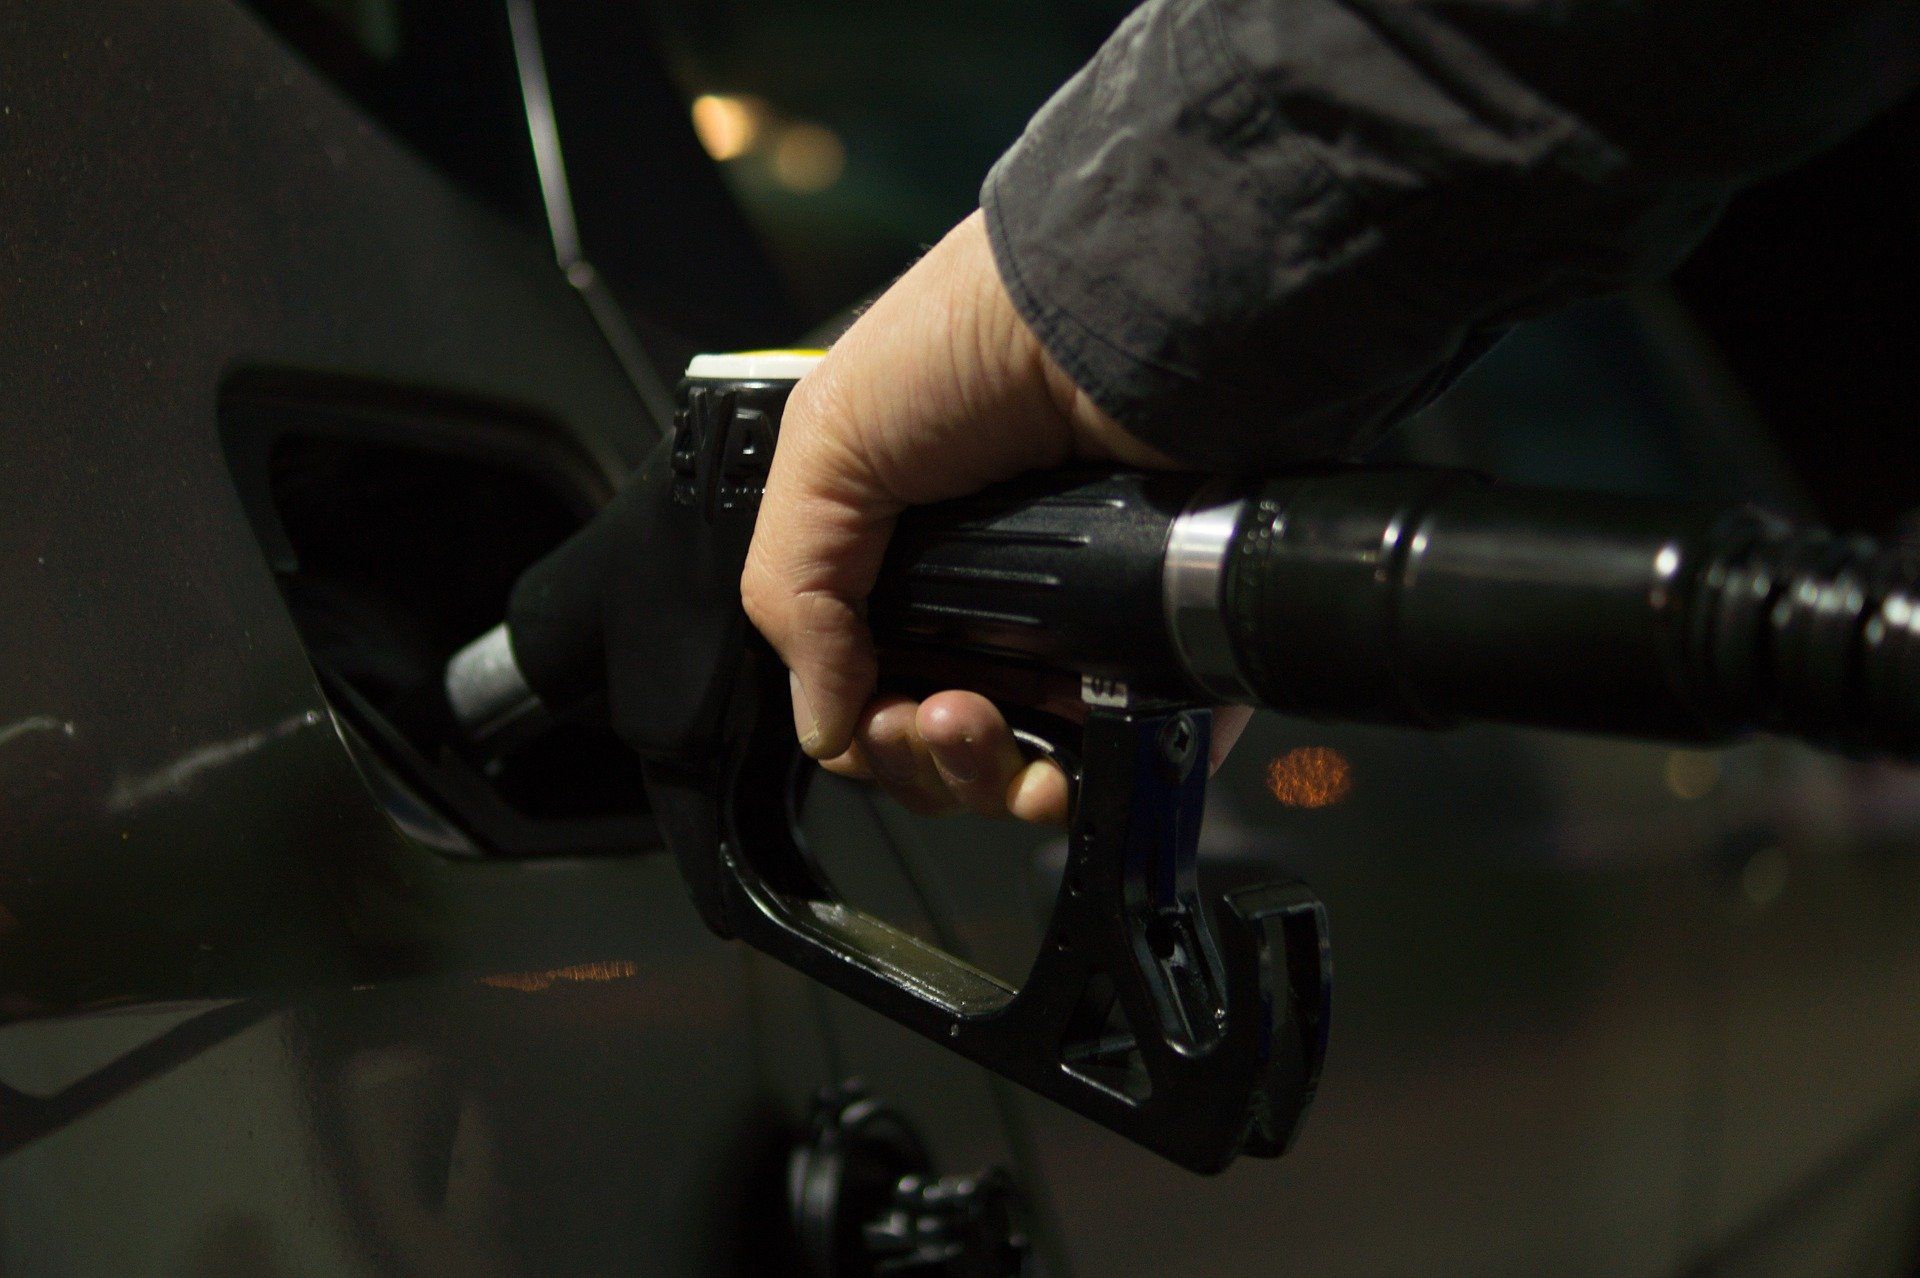 Fuel price today: Petrol and Diesel rates remain unchanged on April 13, 2022